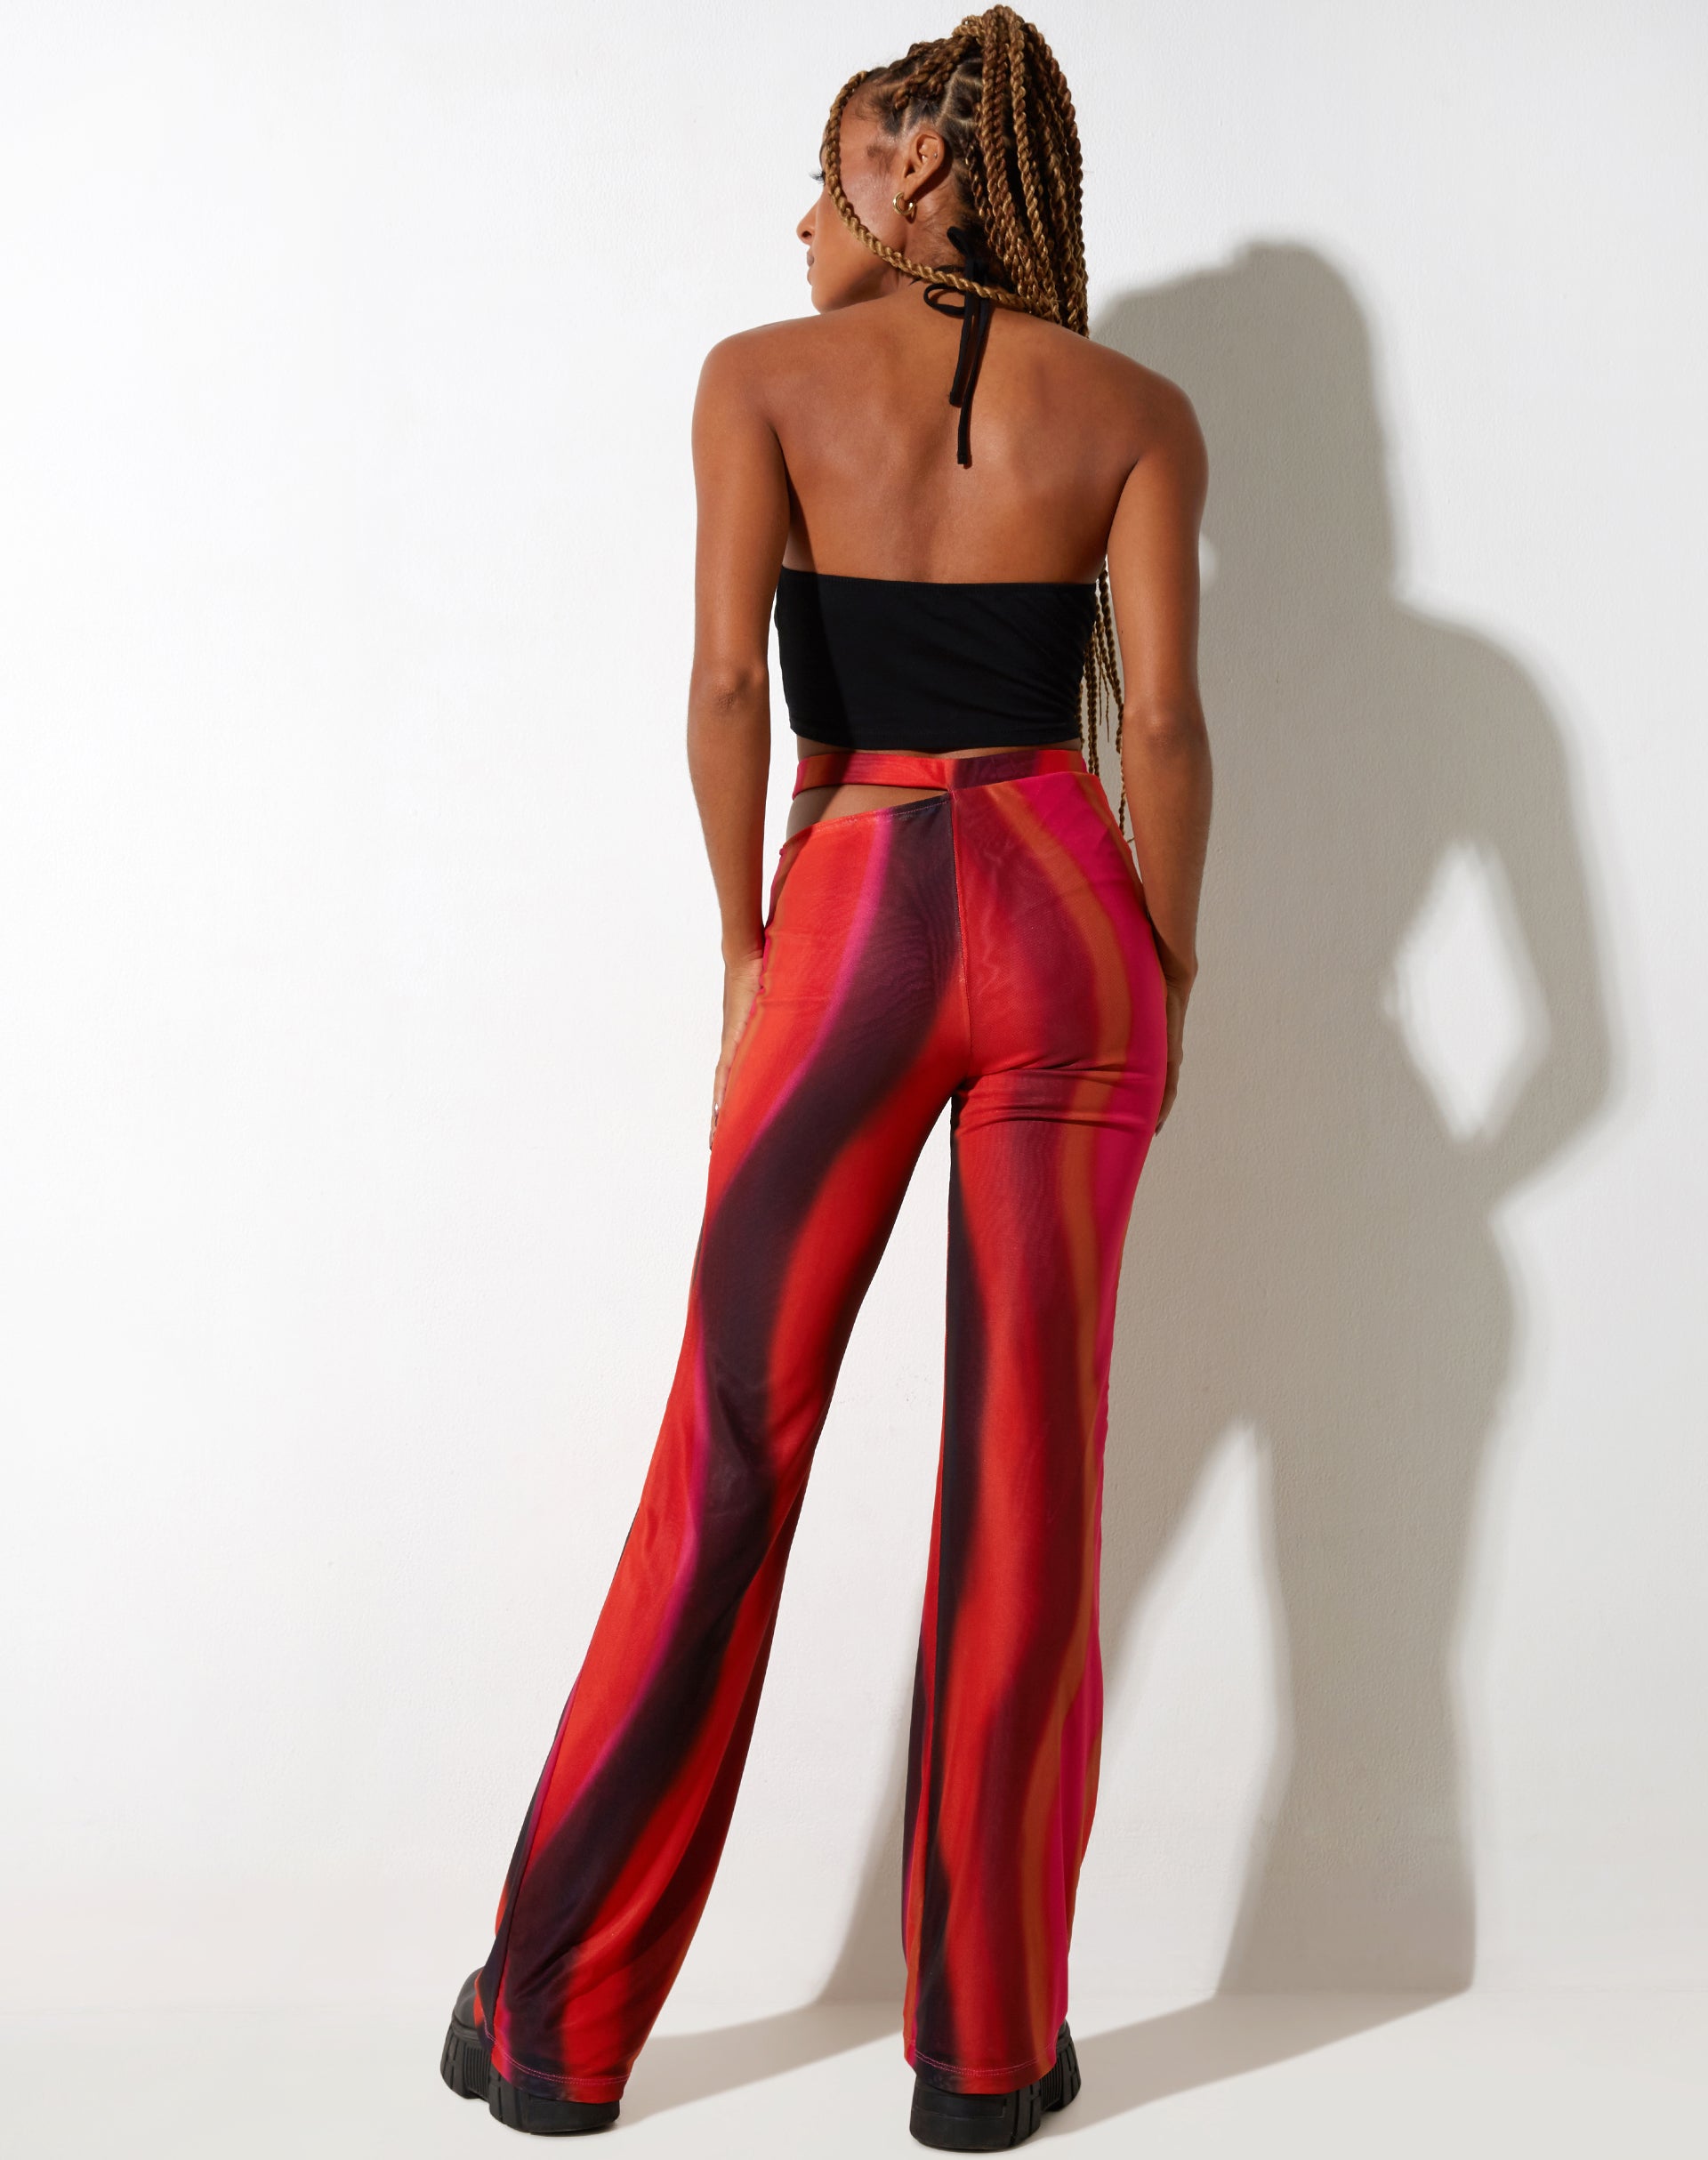 Zola Flare Trouser in Solarized Orange and Pink